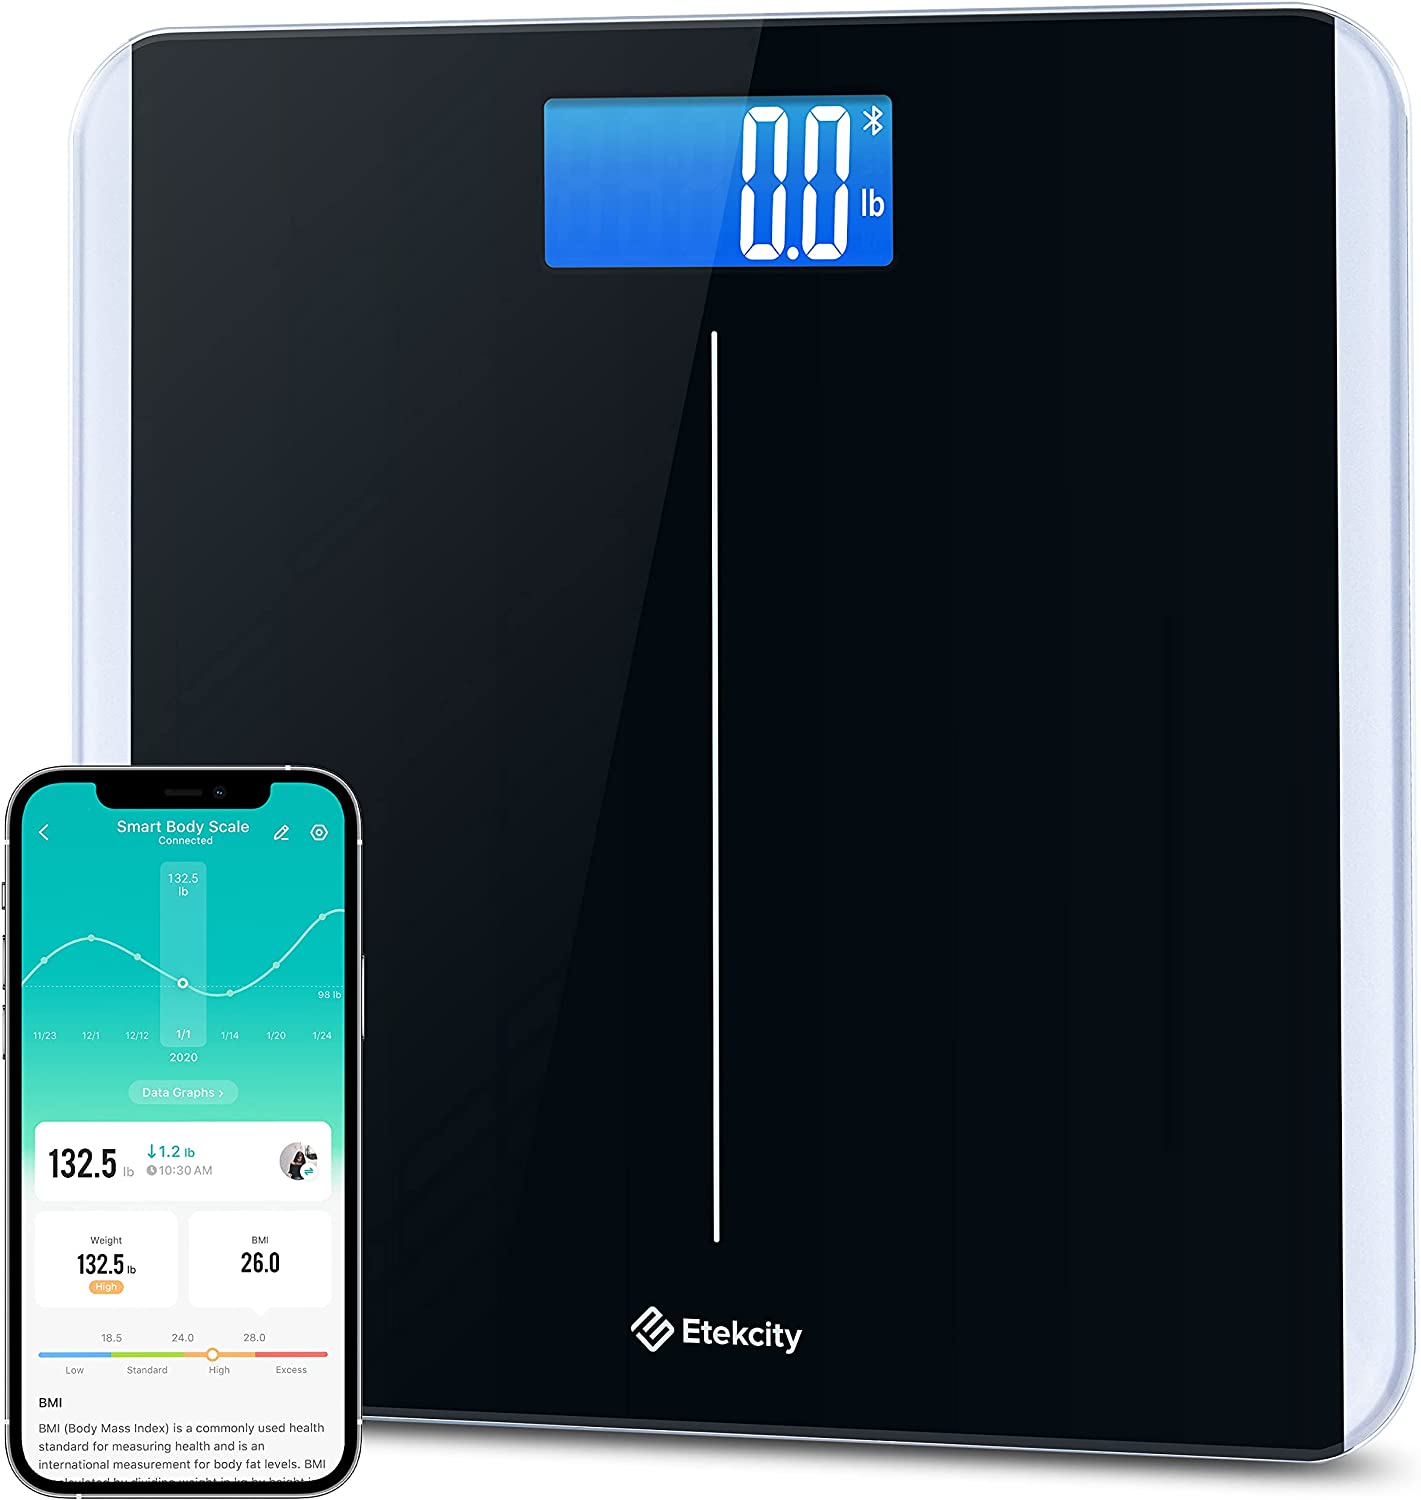 LOFTILLA Scale for Body Weight, Weight Scale, Digital Bathroom Scale, 396  lb Weighing Scale